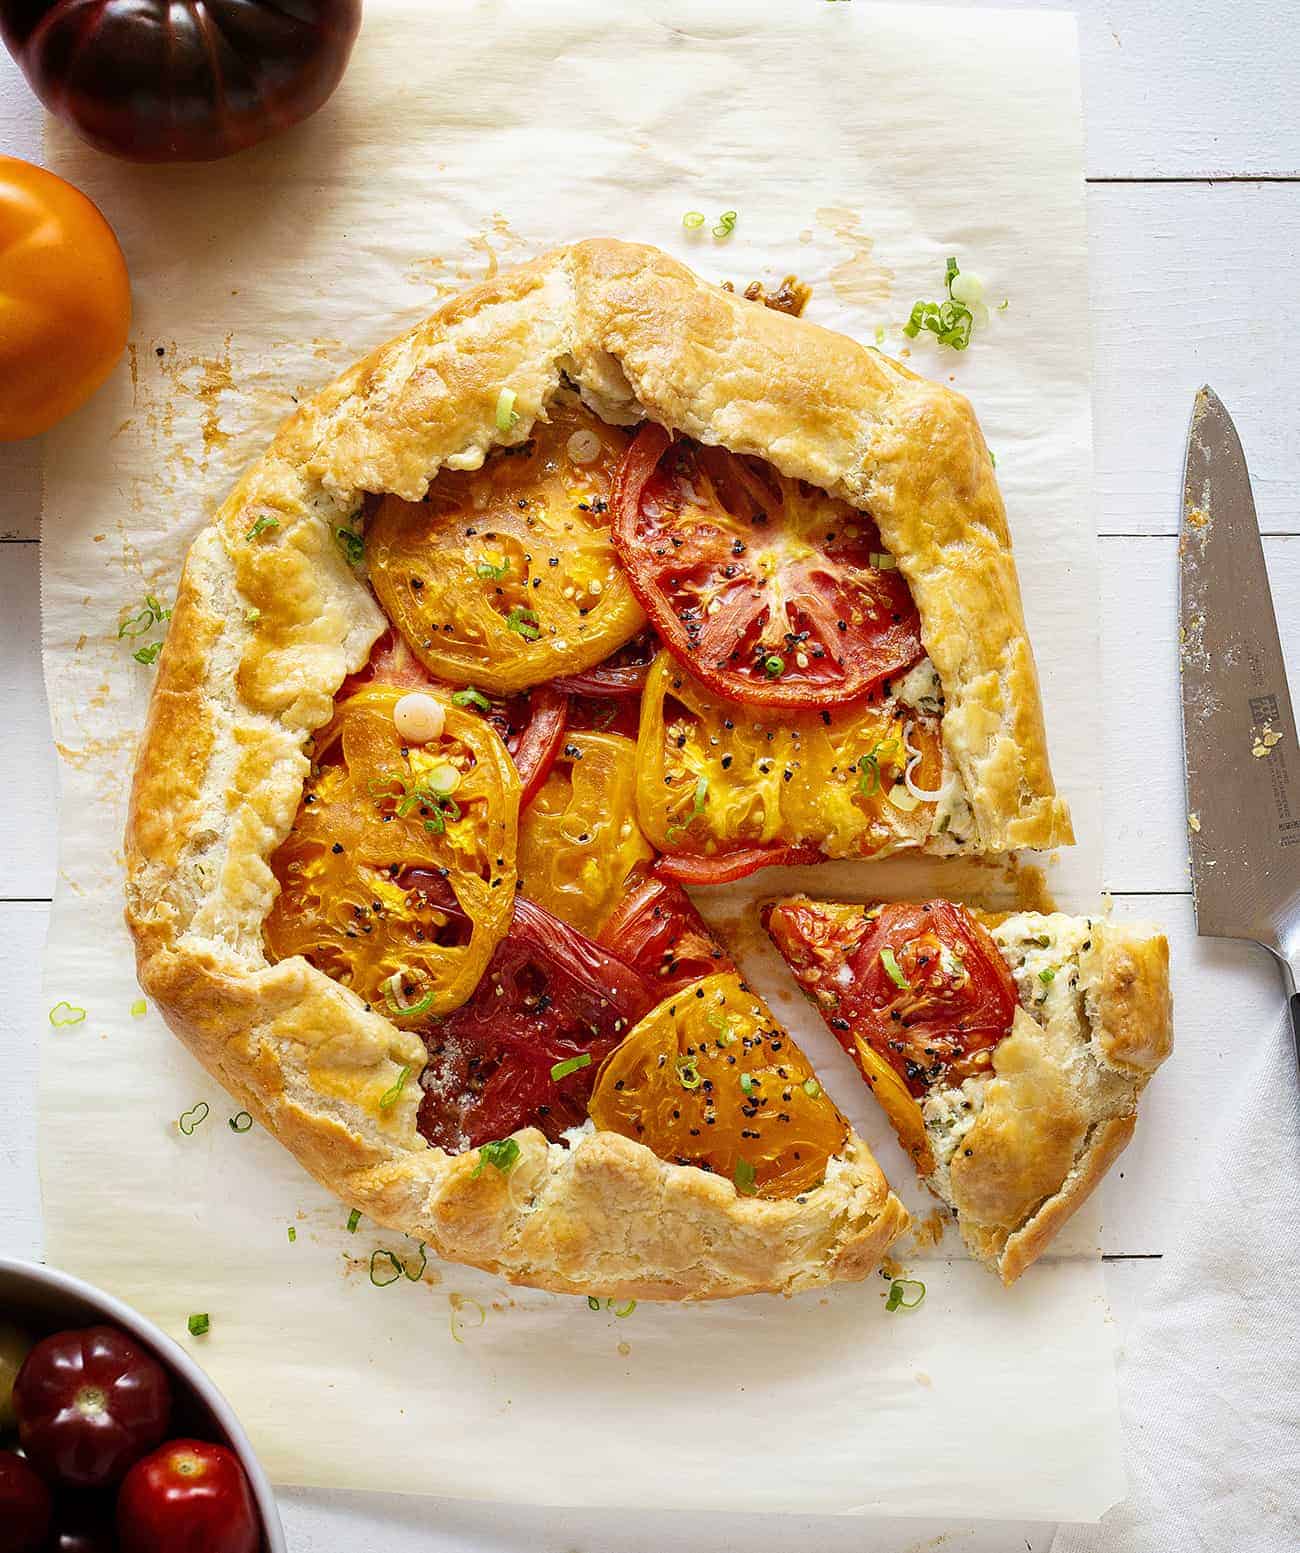 Piece cut out of a Tomato Galette